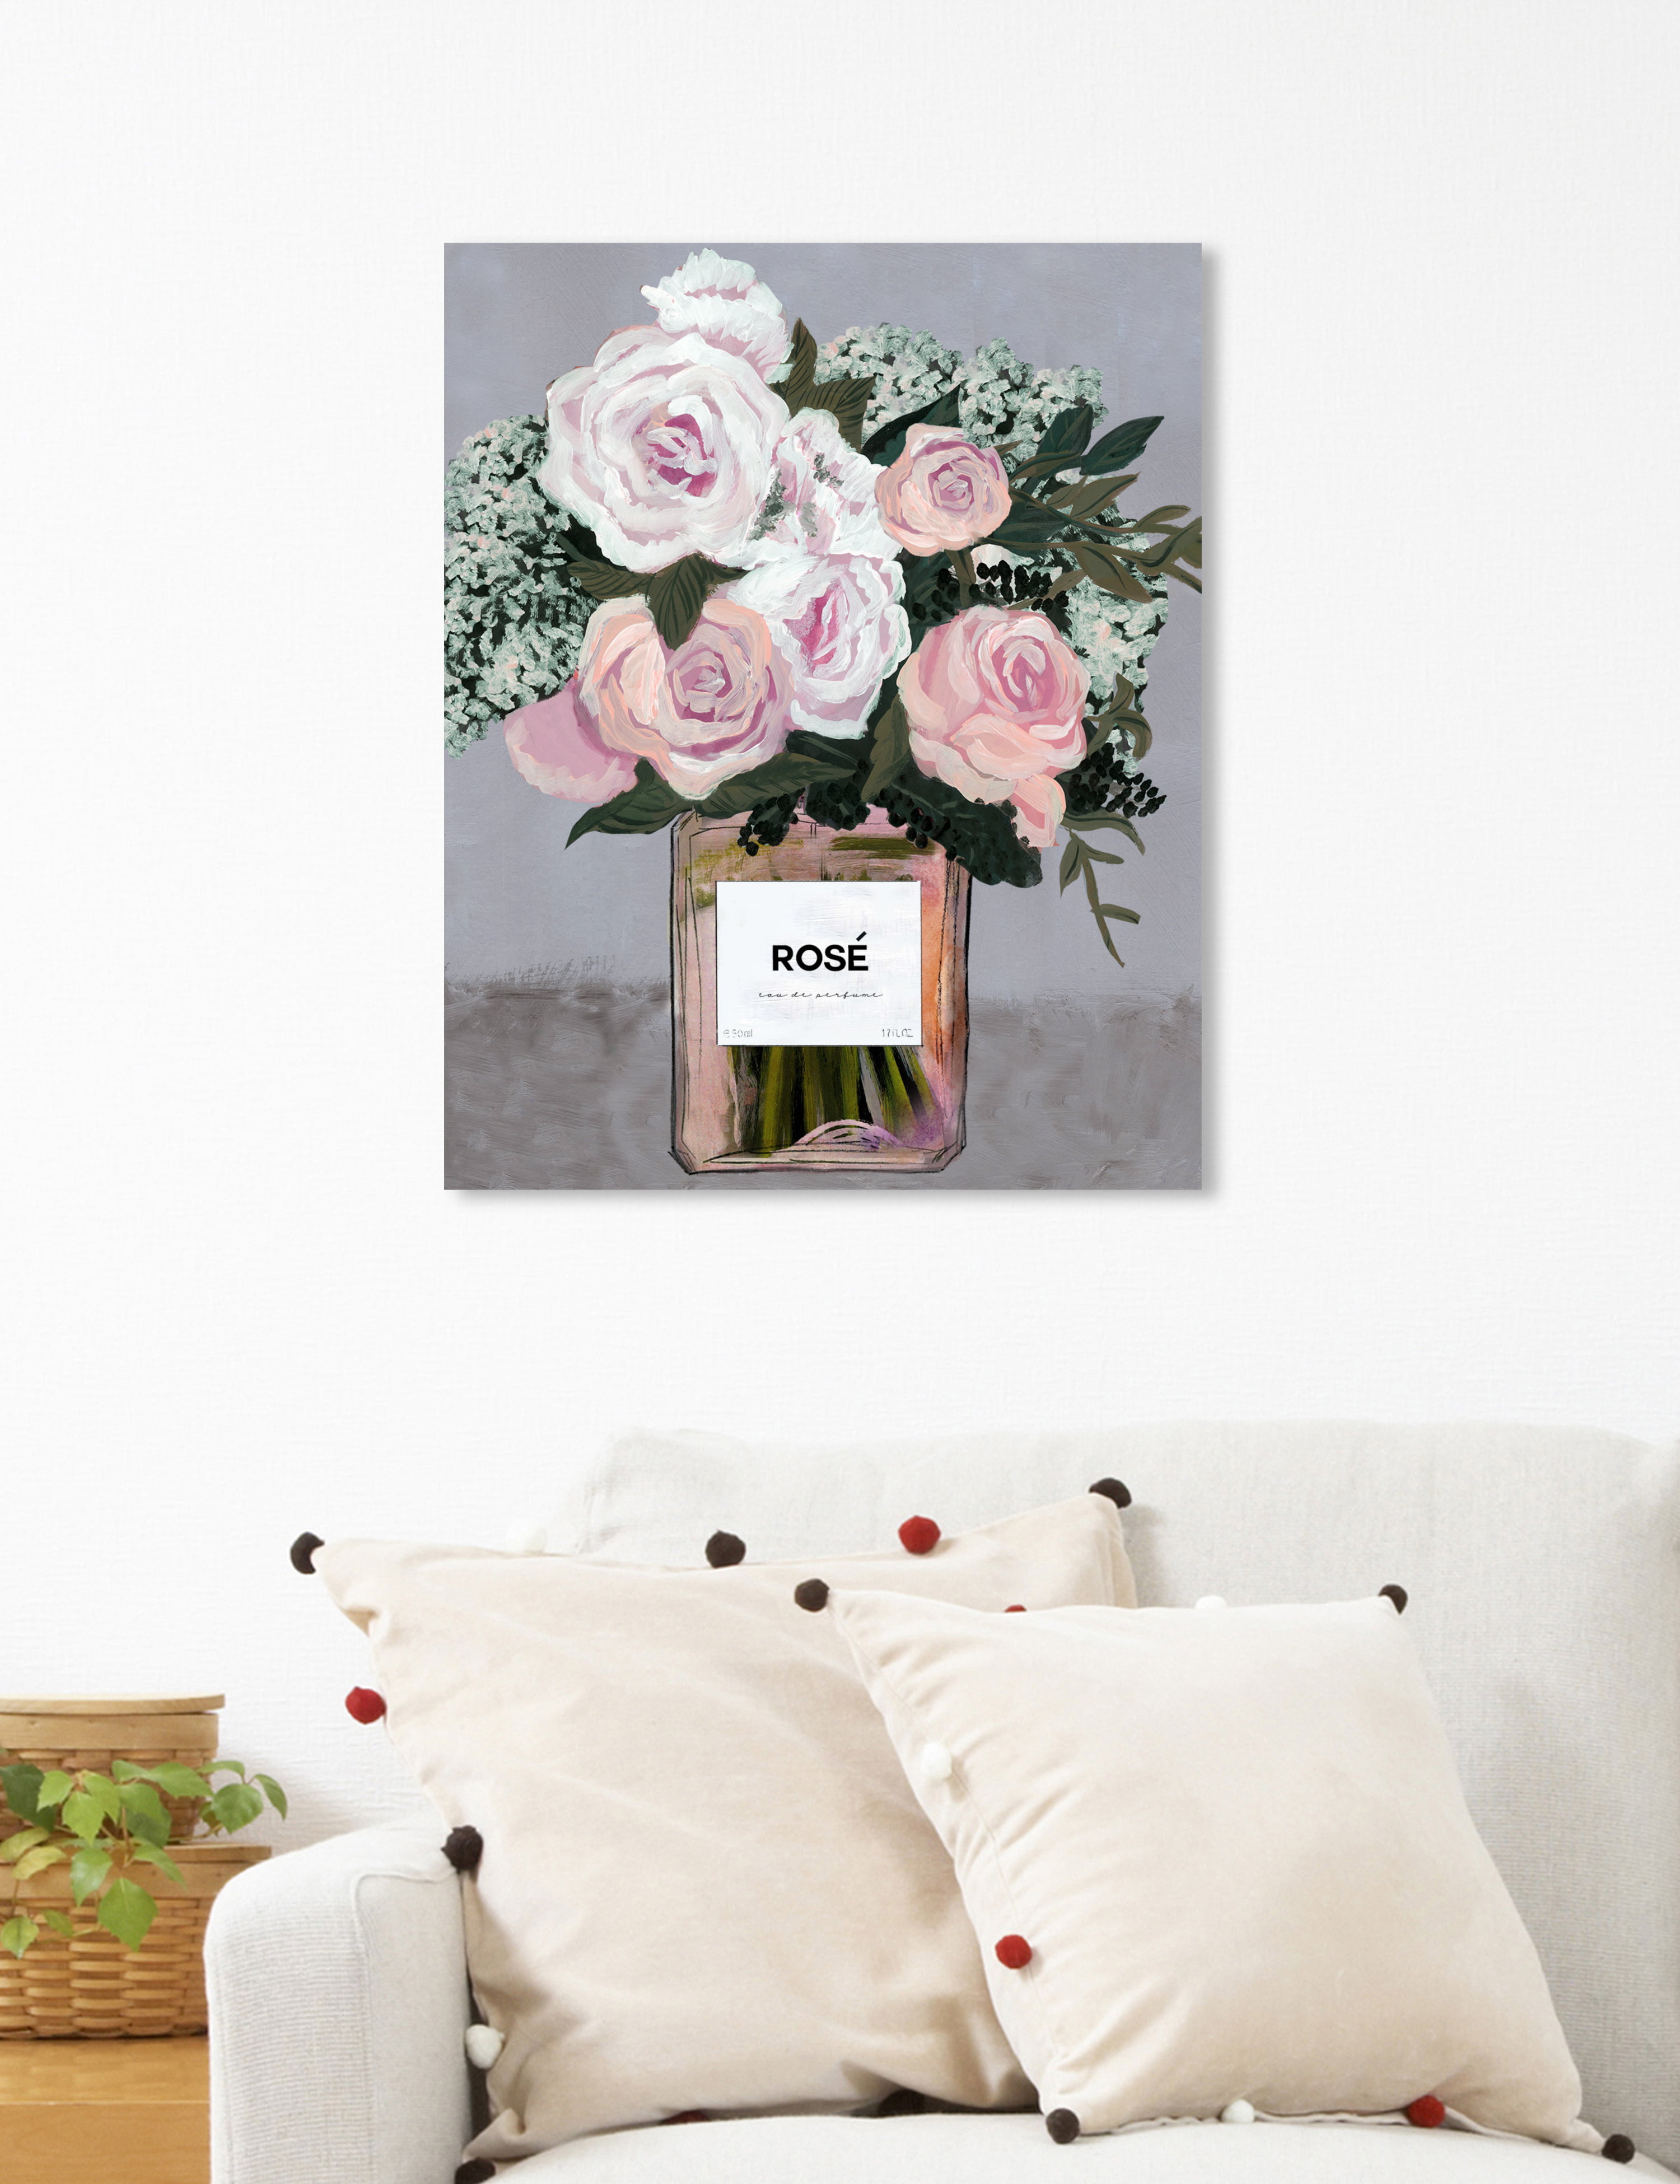 Oliver Gal 'Rose Flowers' Floral and Botanical Wall Art Print on